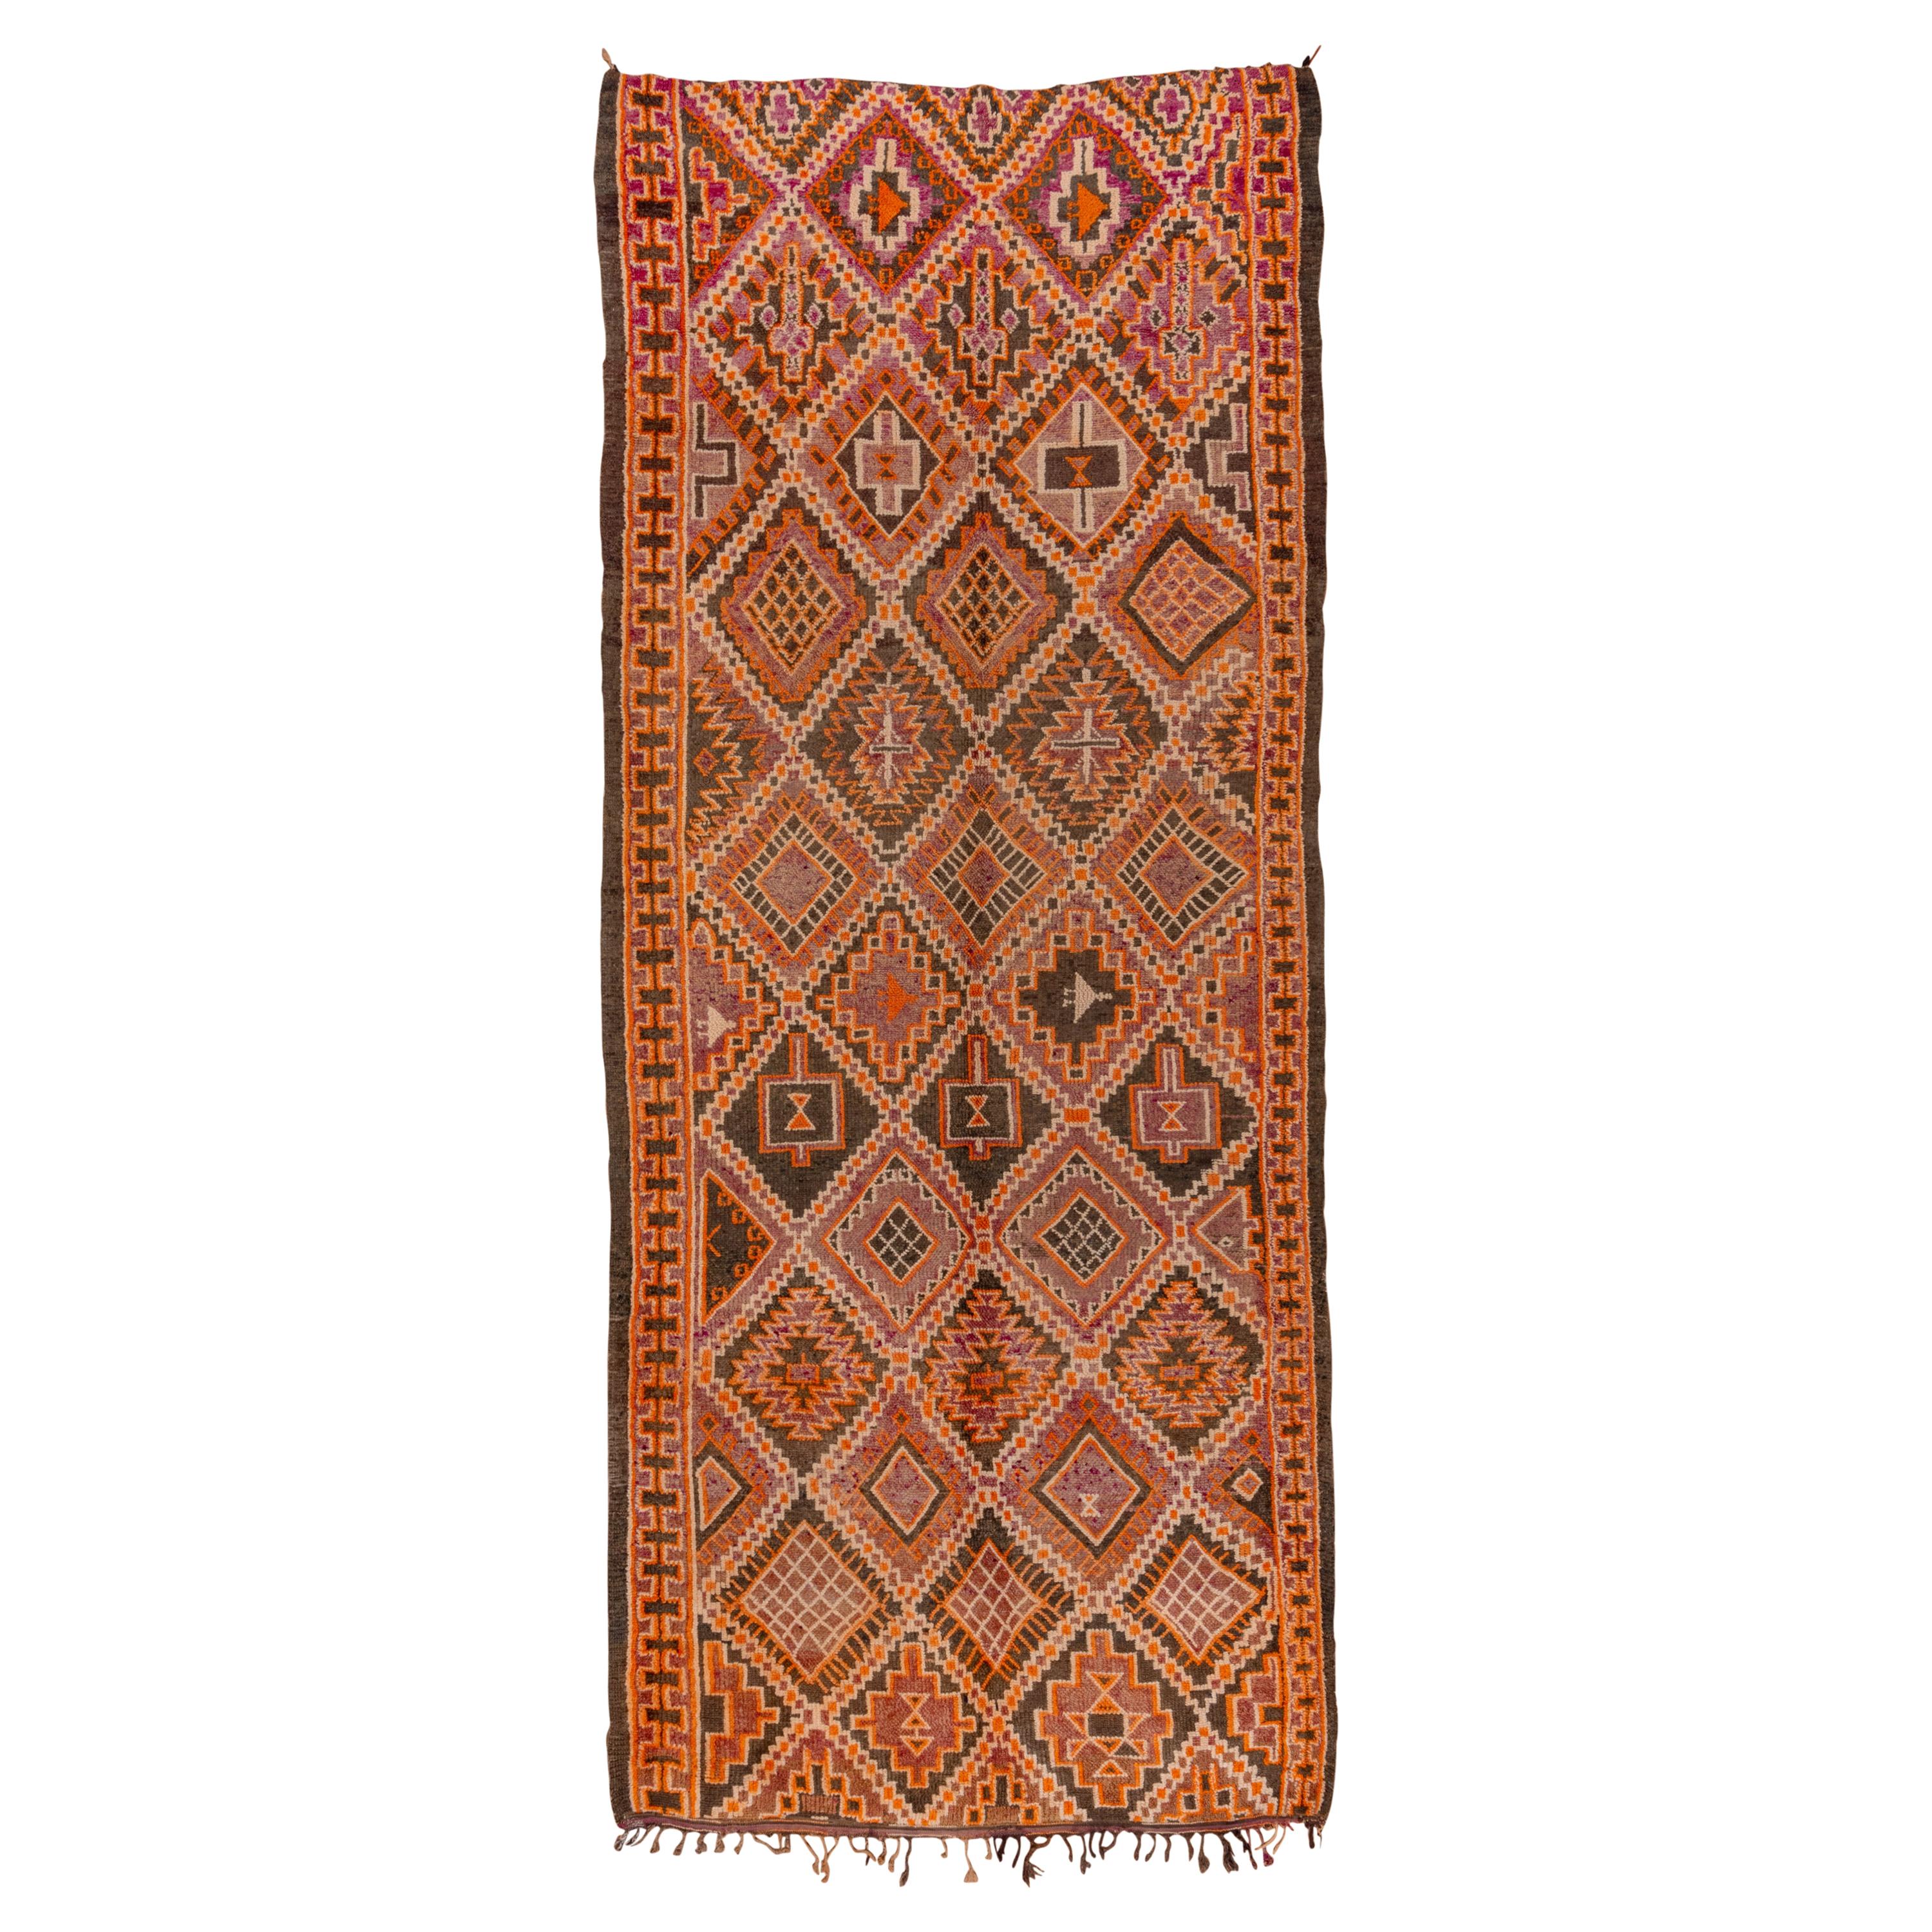 Vintage Tribal Moroccan Azilal Gallery Carpet, Orange Brown and Purple Tones For Sale